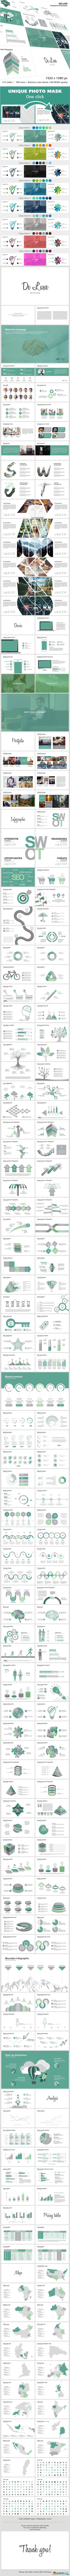 Deluxe Start Up Business Powerpoint Template